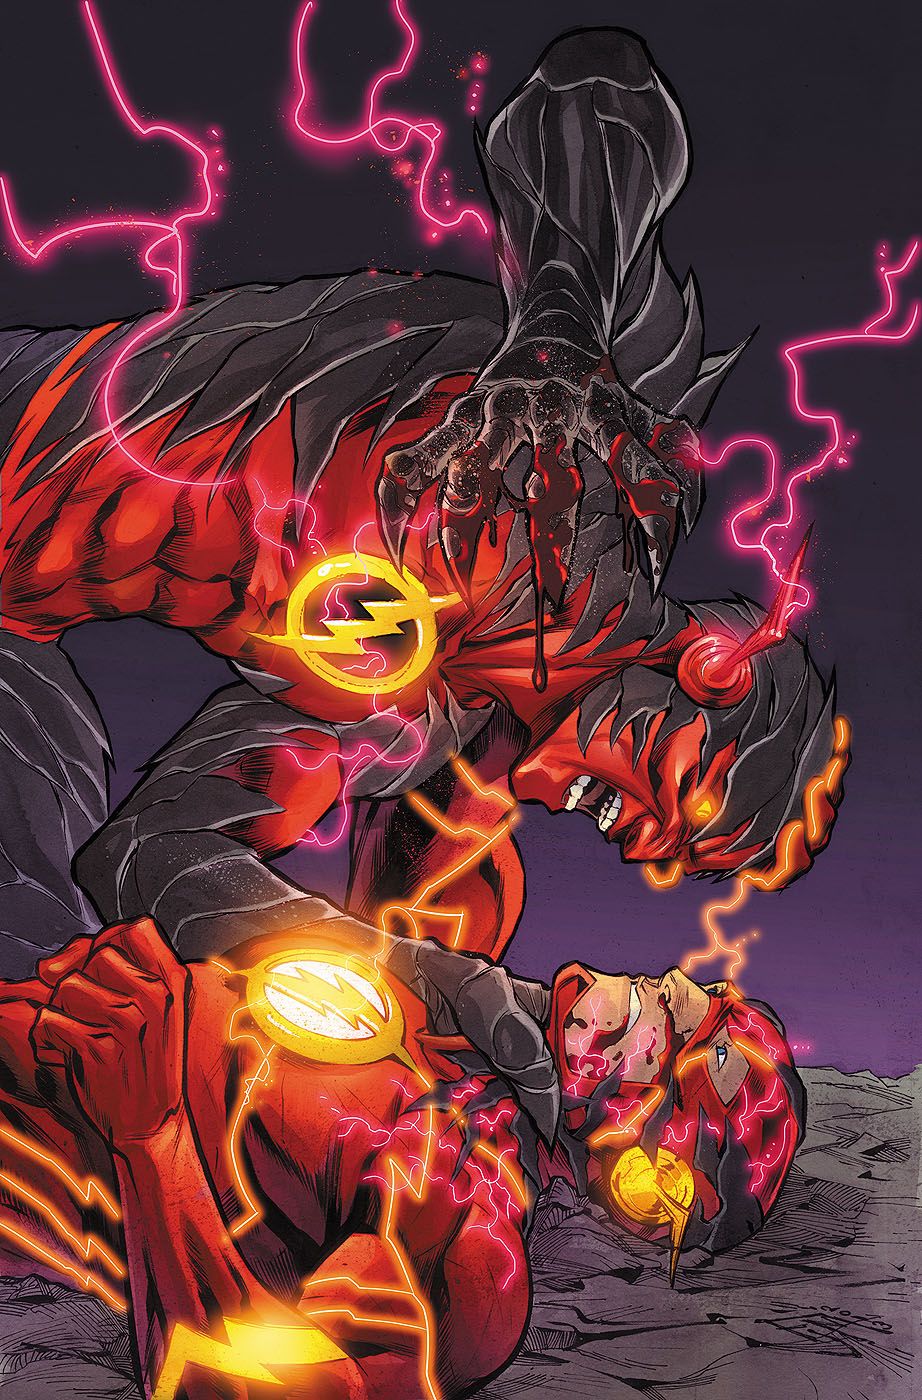 Free download The Flash New 52 Image so the new [922x1400] for your Desktop, Mobile & Tablet. Explore The Flash New 52 Wallpaper. The Flash New 52 Wallpaper, New 52 Wallpaper, New 52 Batman Wallpaper